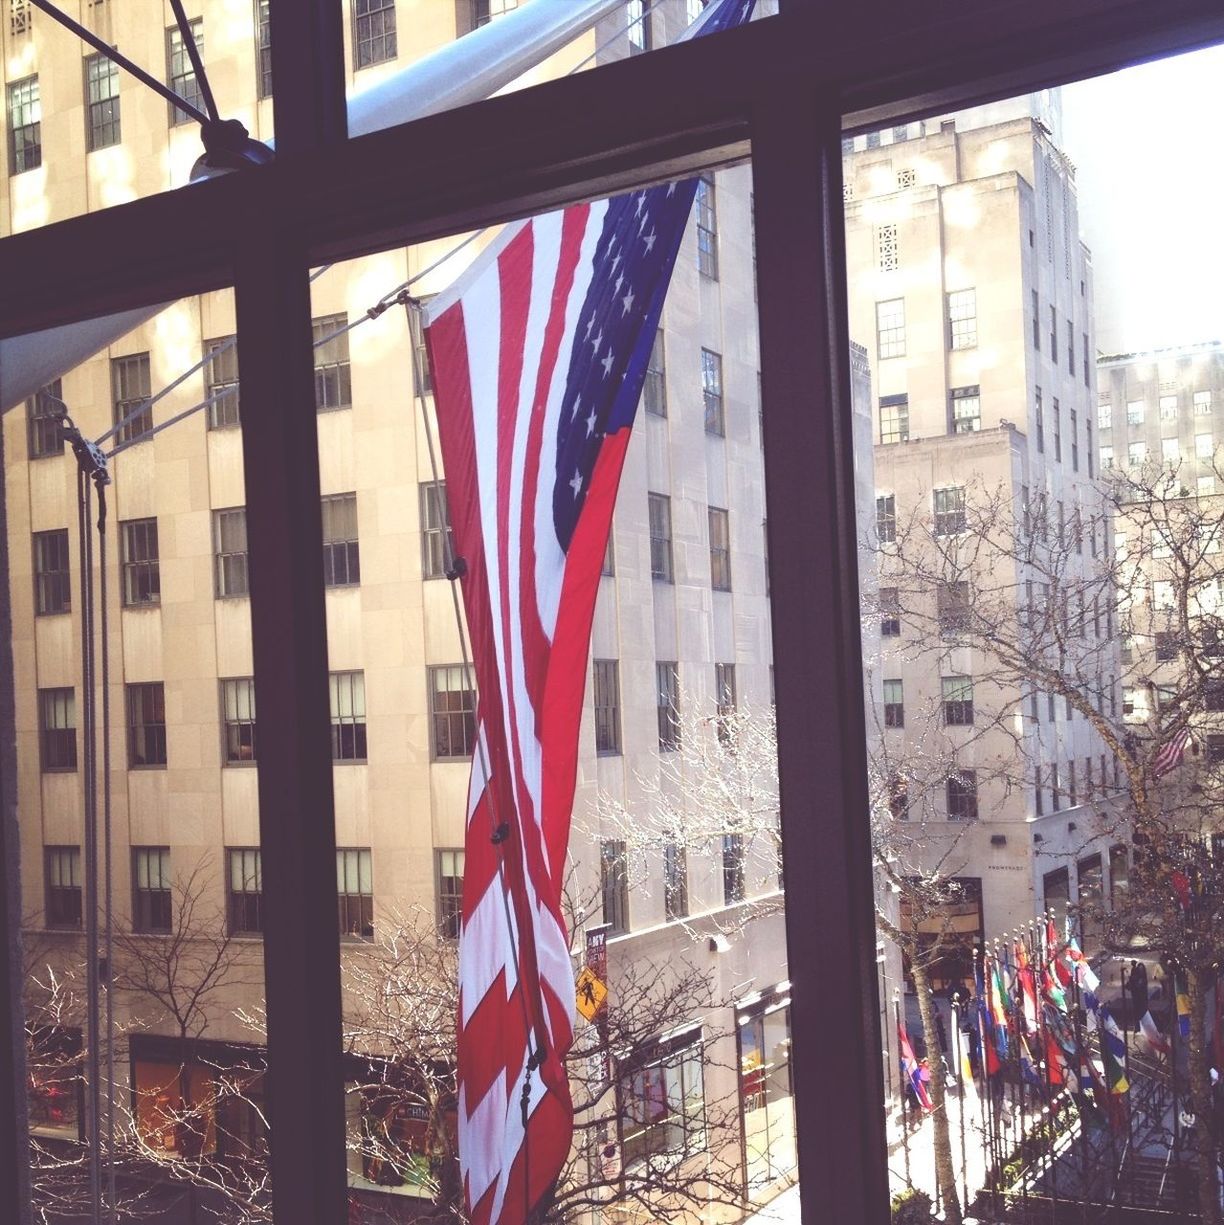 View of buildings and american flag through window